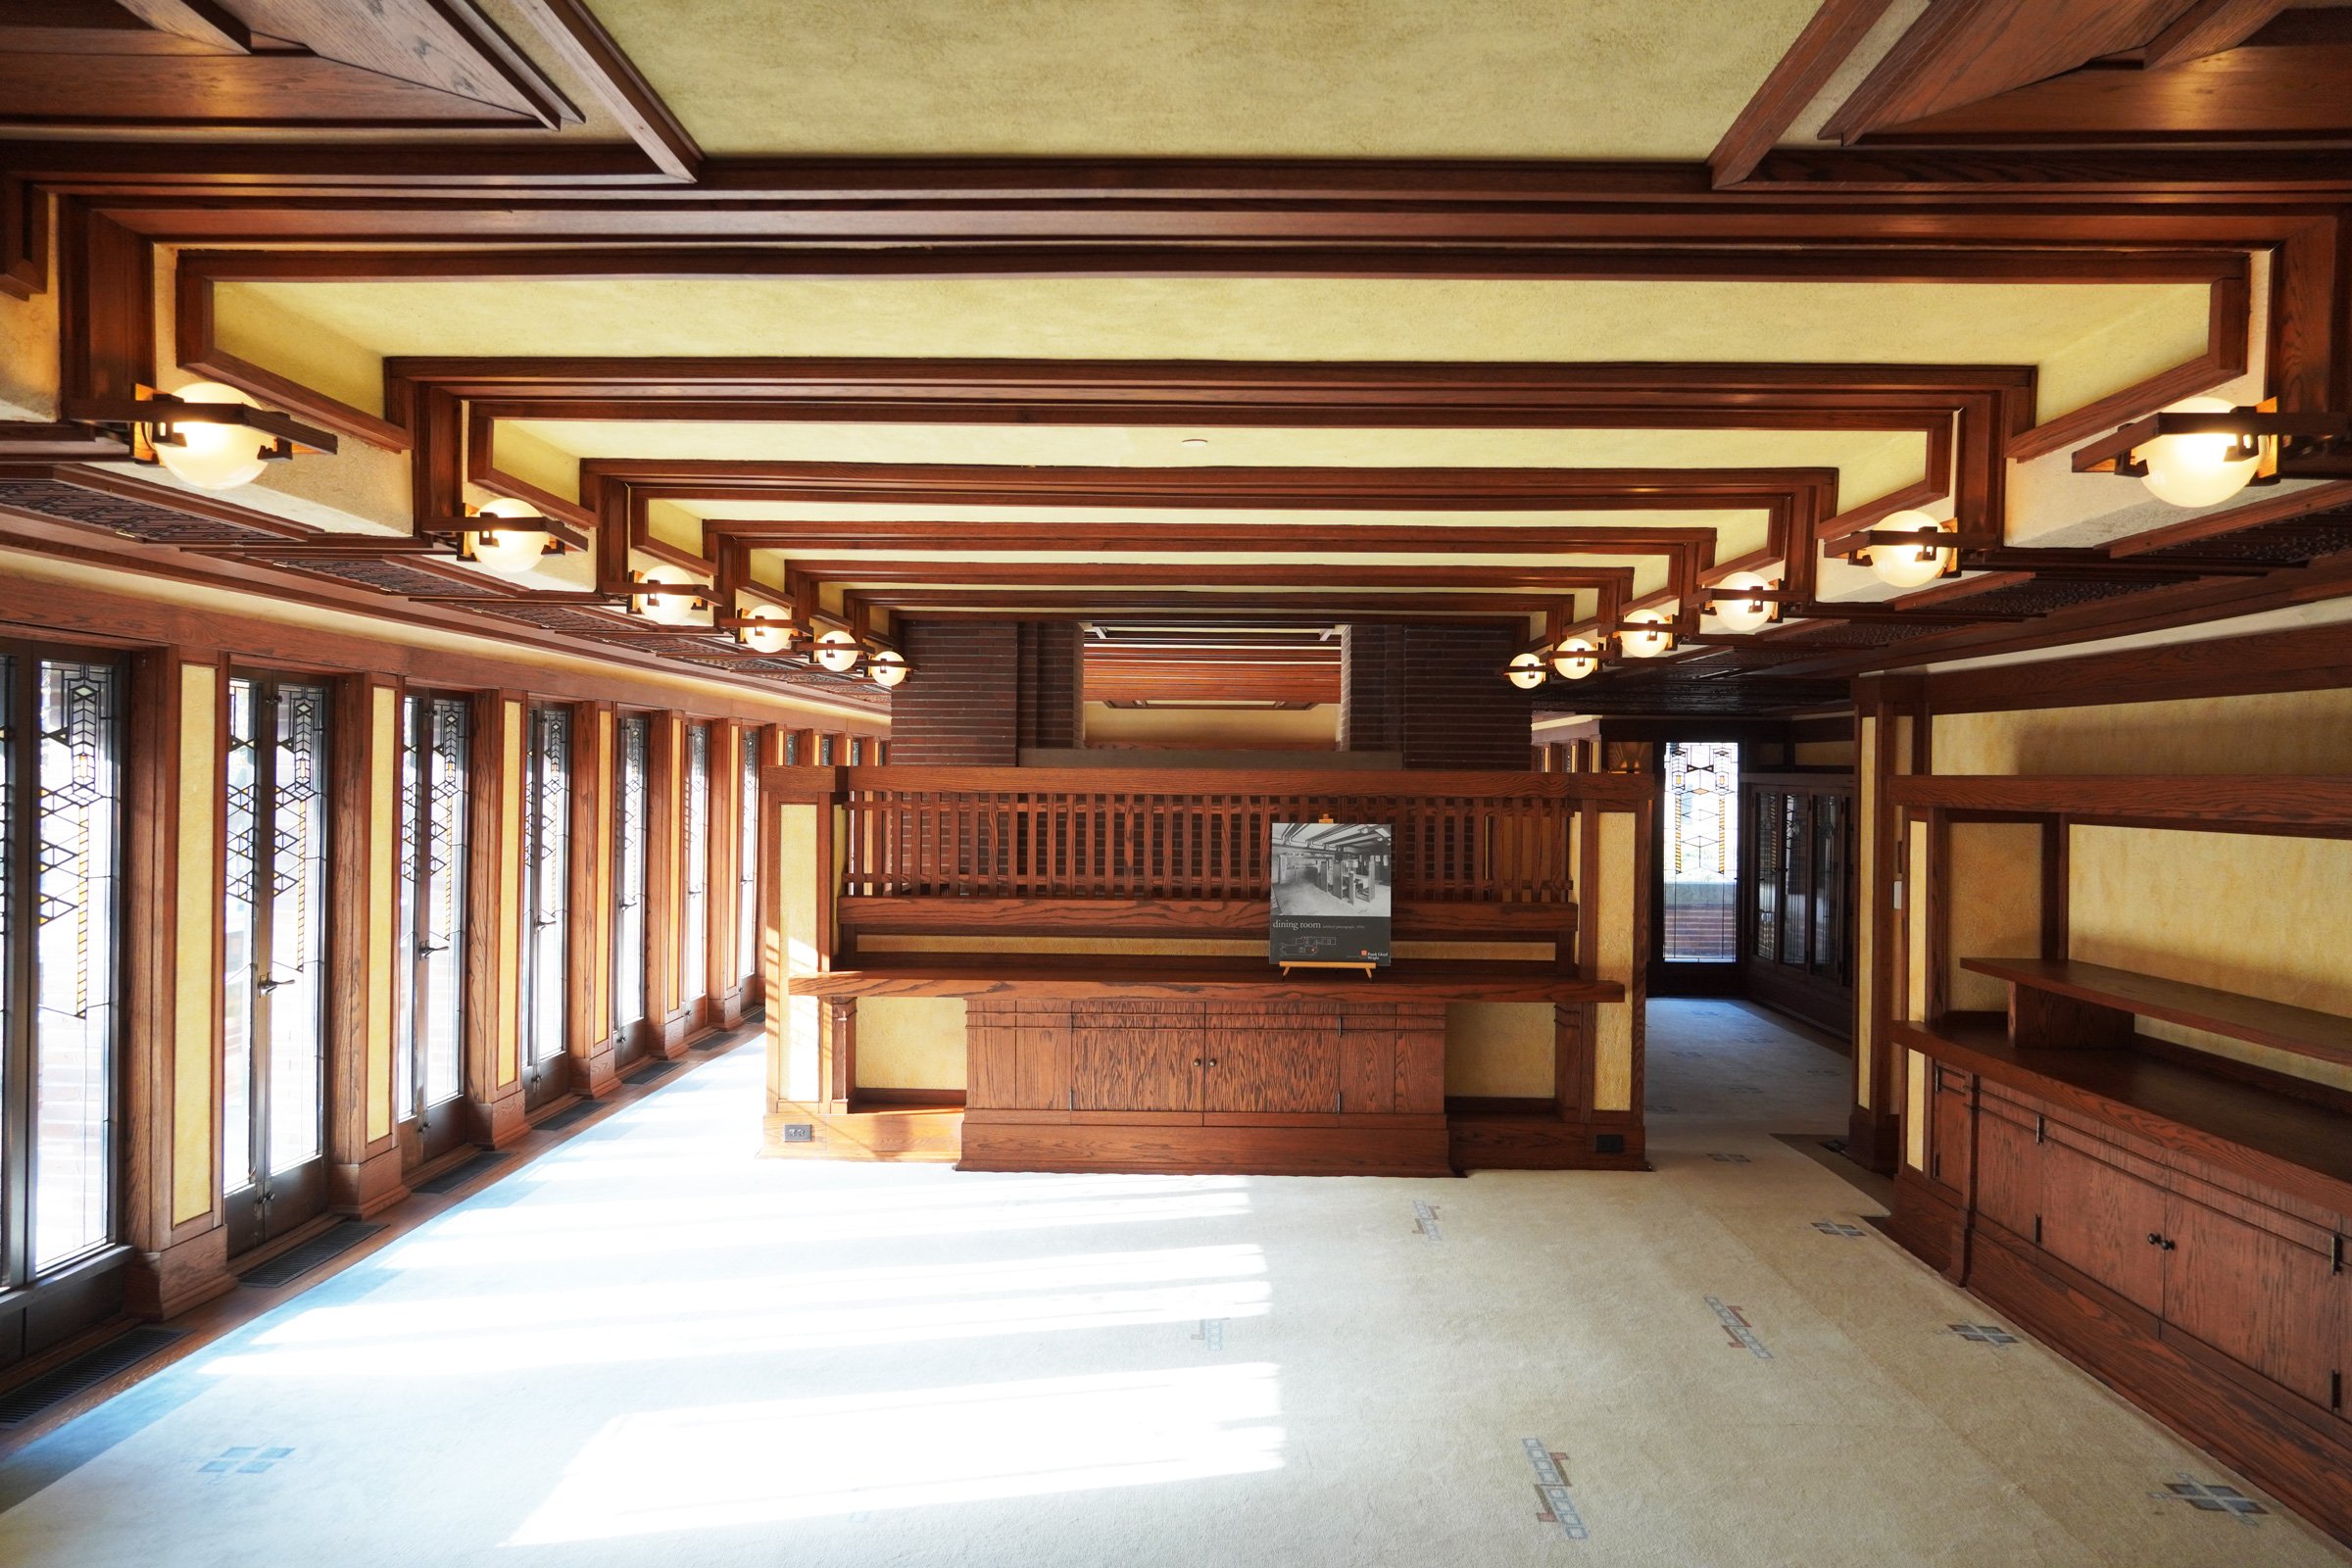 A Brief History of The Robie House by Frank Lloyd Wright